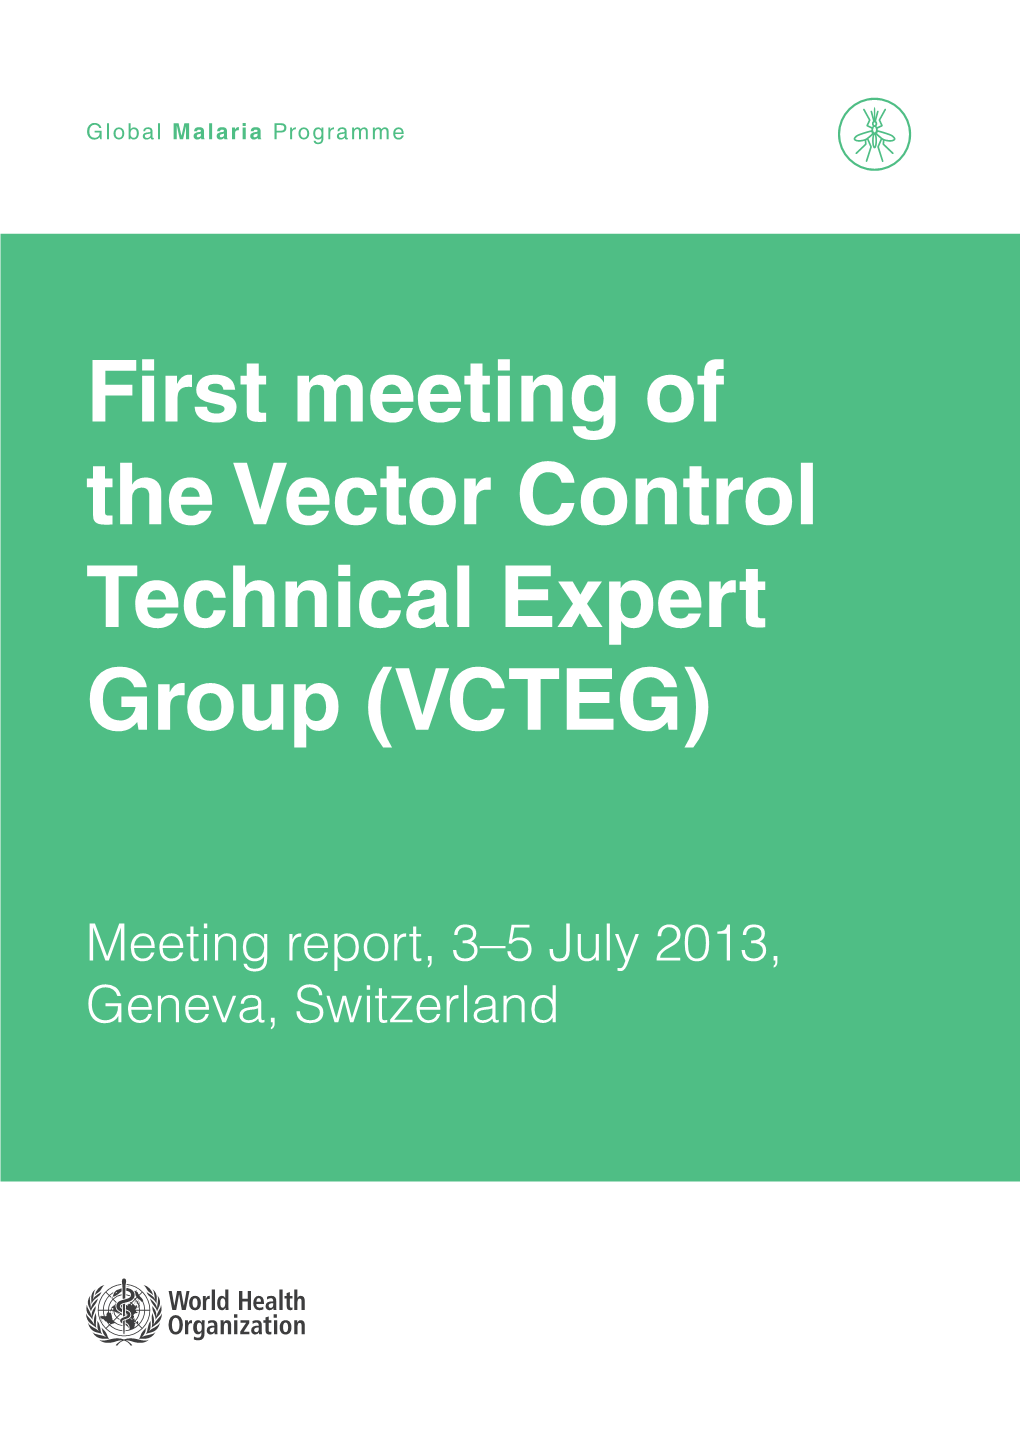 First Meeting of the Vector Control Technical Expert Group (VCTEG)